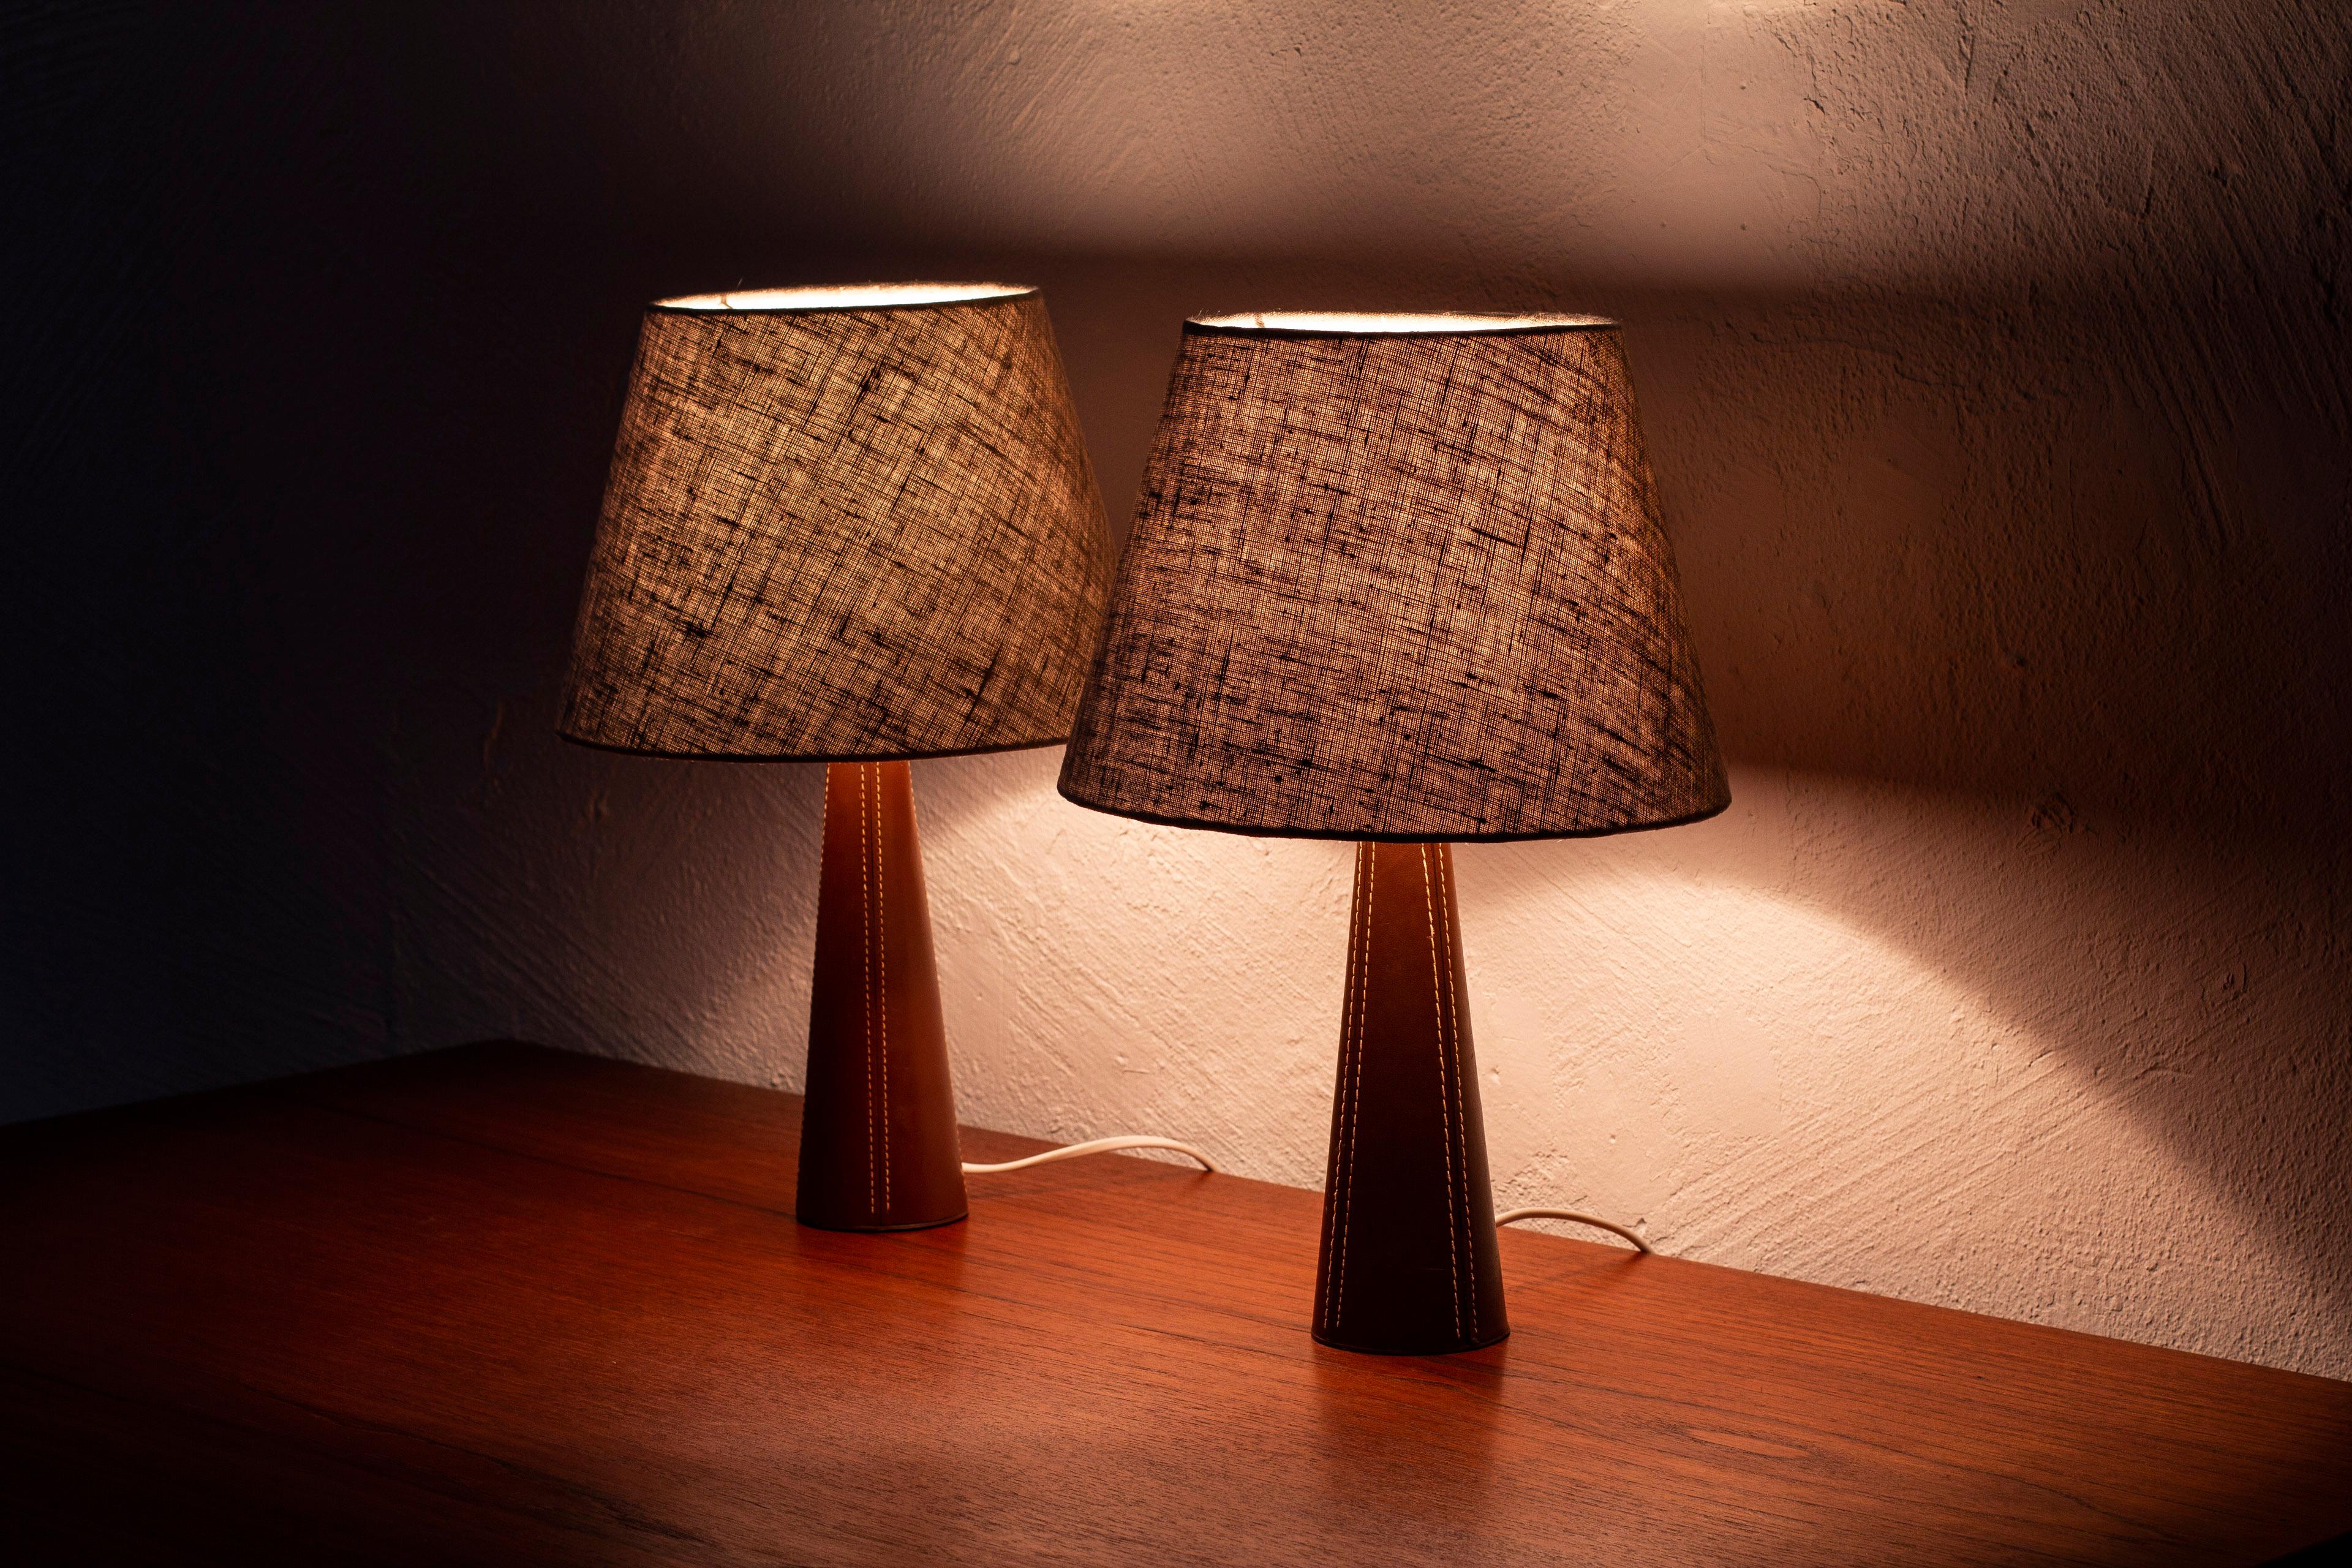 Pair of leather clad table lamps similar to the style of Lisa Johansson Pape. Conical lamp base with brown hand sewn leather finished with a brass lamp holder. Lamp shades in natural/grey linen fabric. Made in Scandinavia during the 1960s.Light